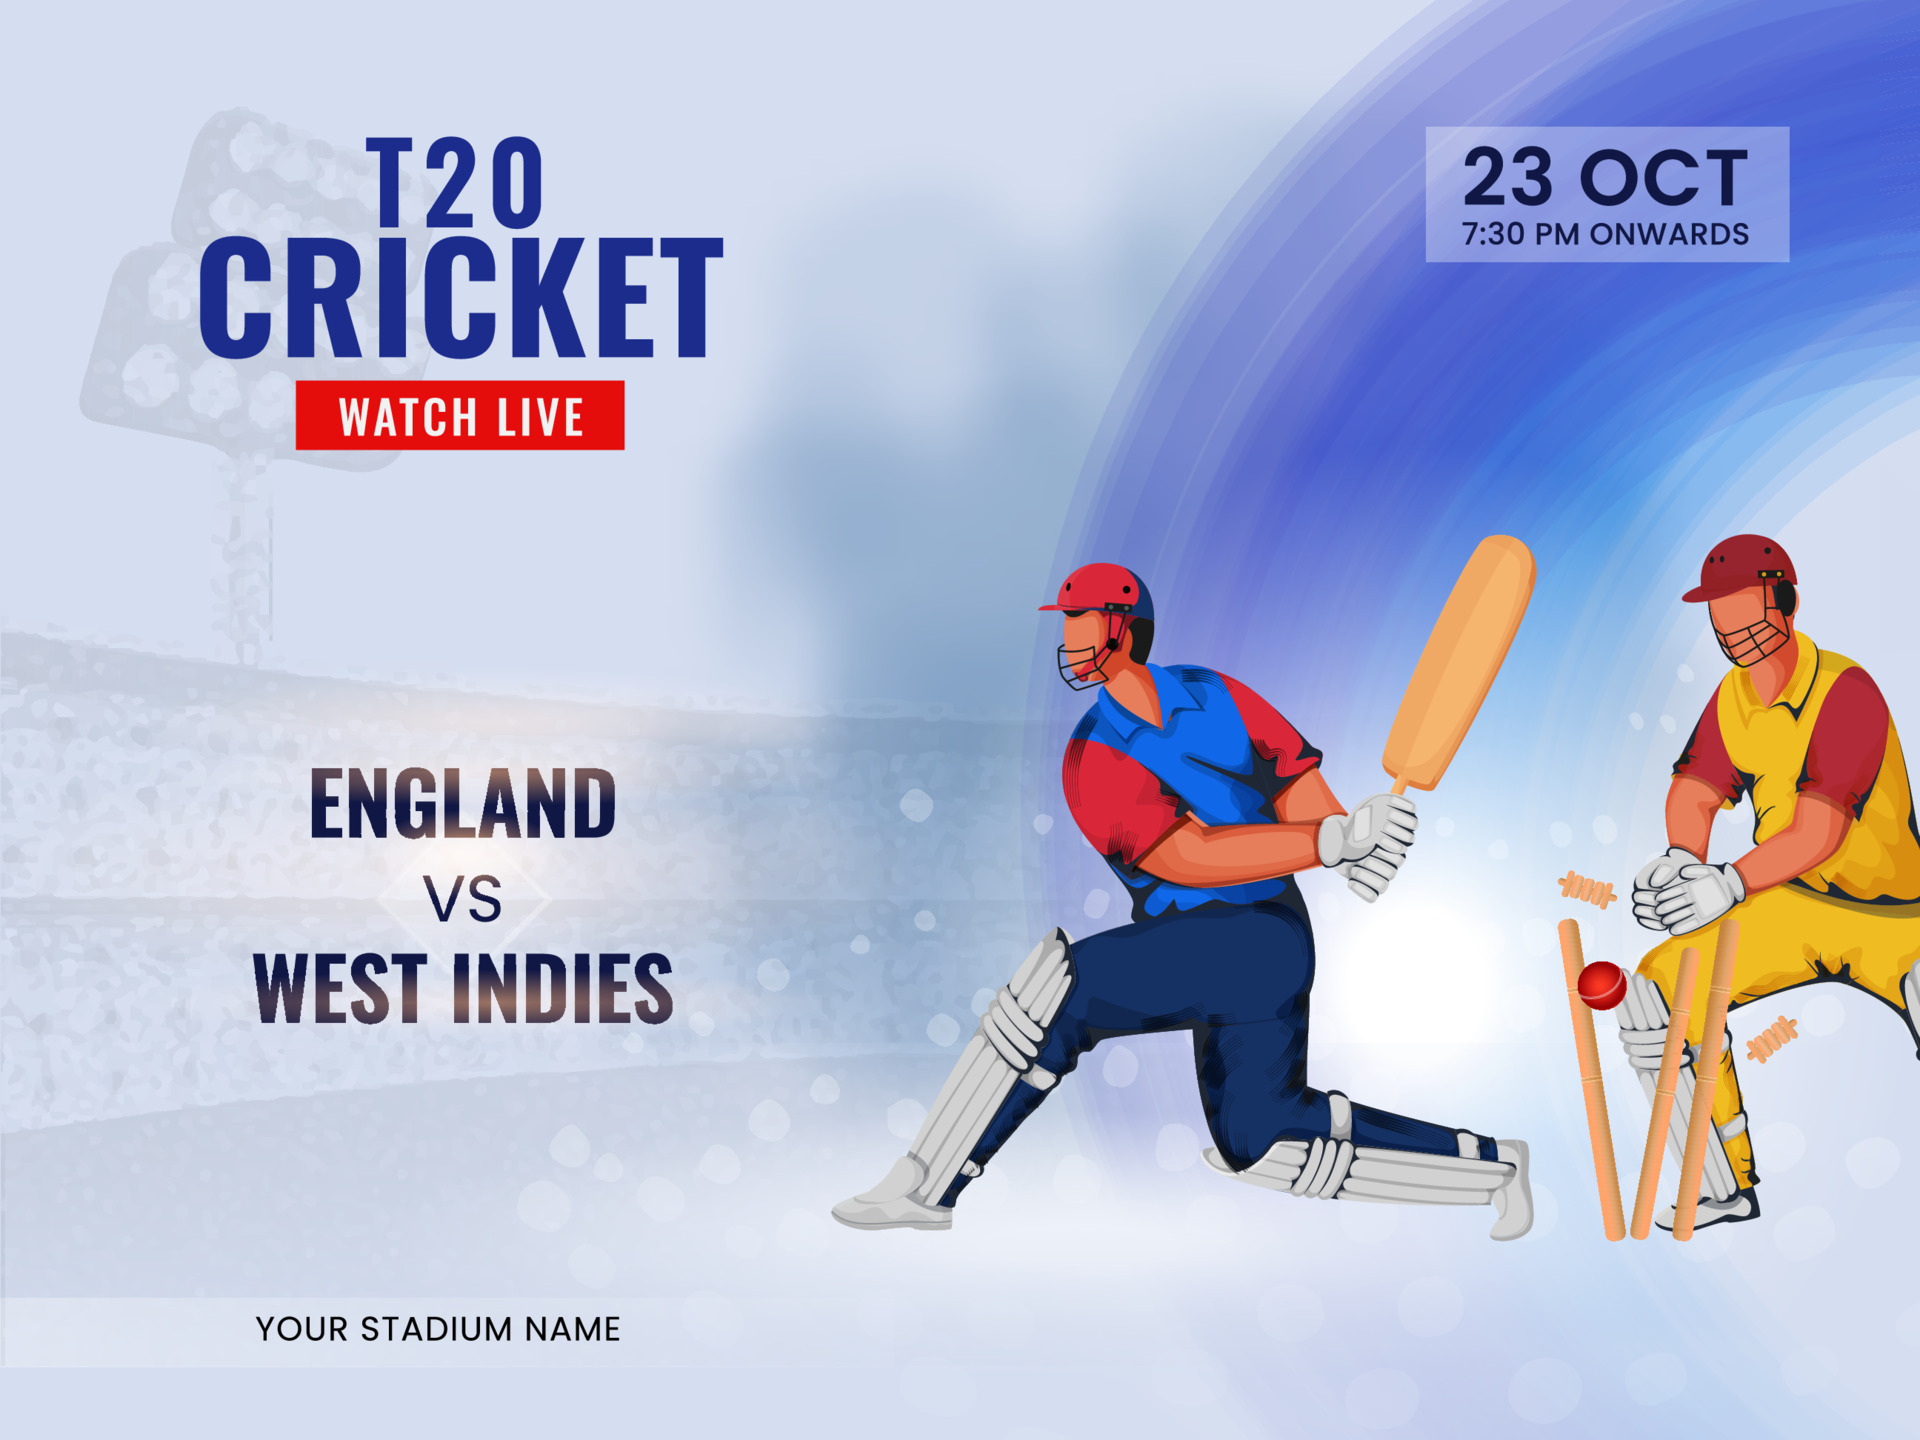 T20 Cricket Watch Live Show Of Participating Team England VS West Indies And Cricketer Players